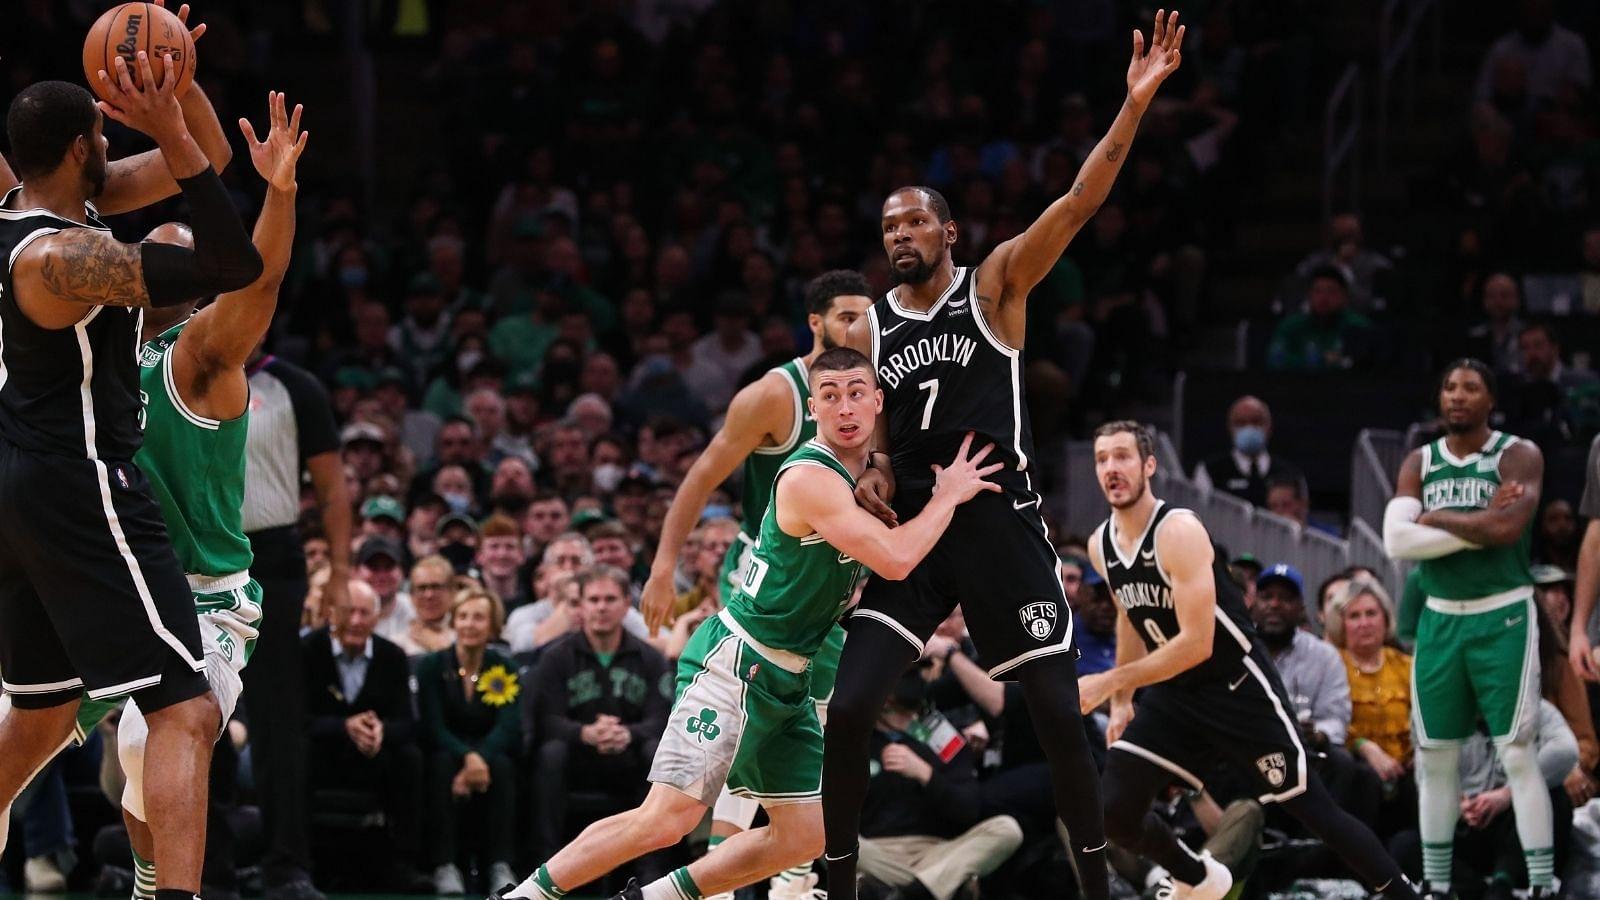 "Brooklyn Nets have been the worst team in the NBA for more than a month": Kevin Durant and Co are tied with Houston Rockets for the worst record in last 20 games